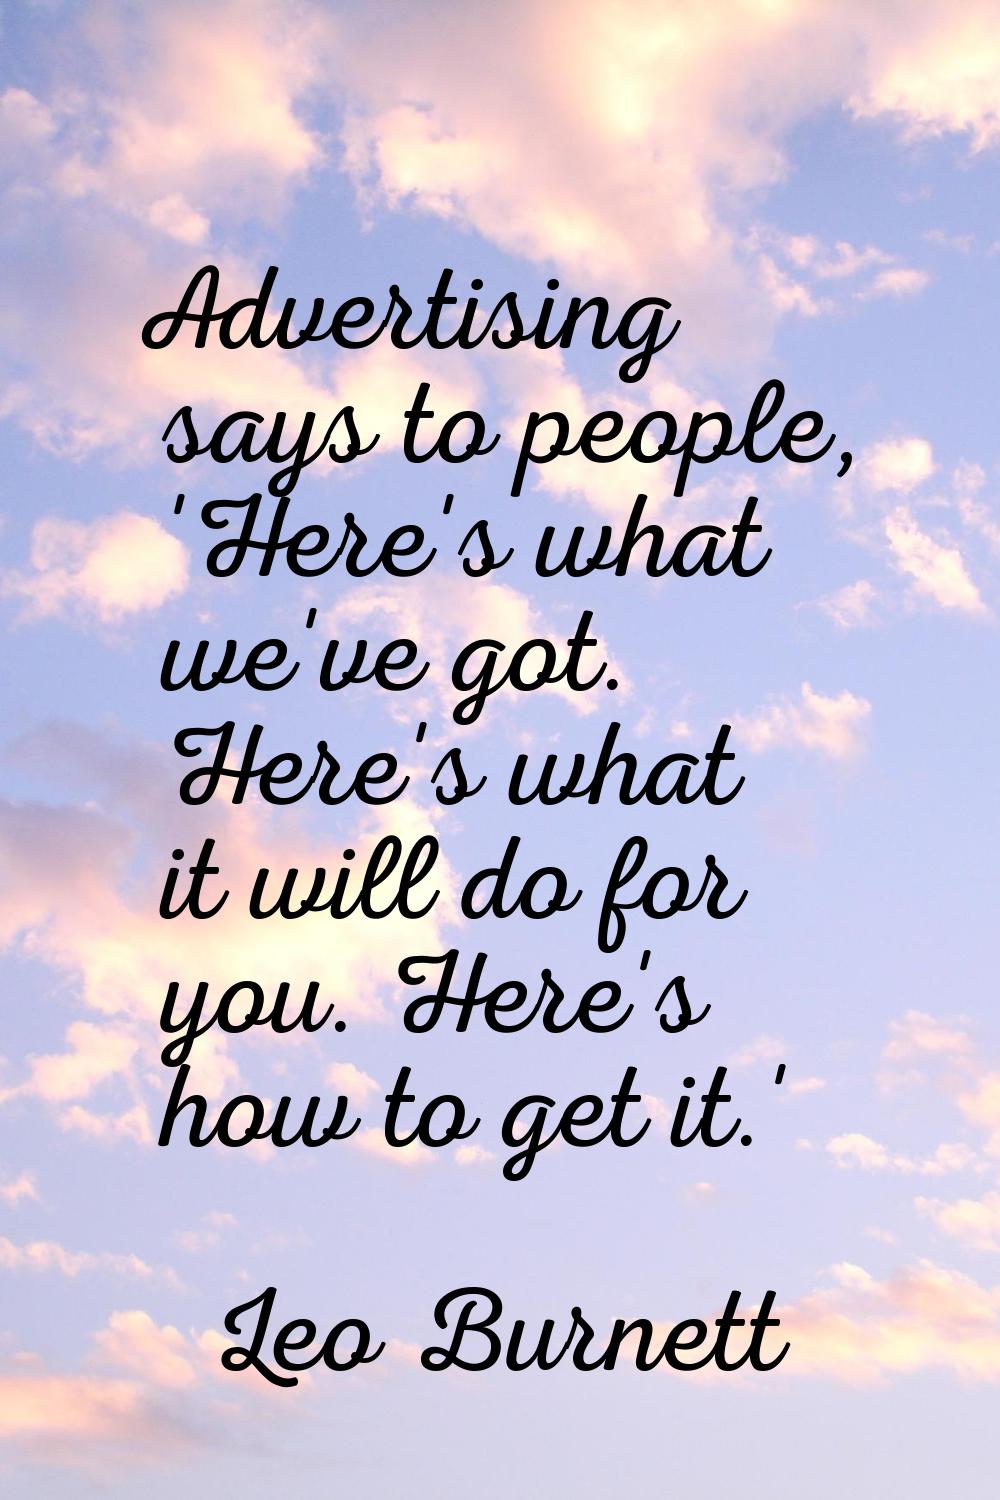 Advertising says to people, 'Here's what we've got. Here's what it will do for you. Here's how to g